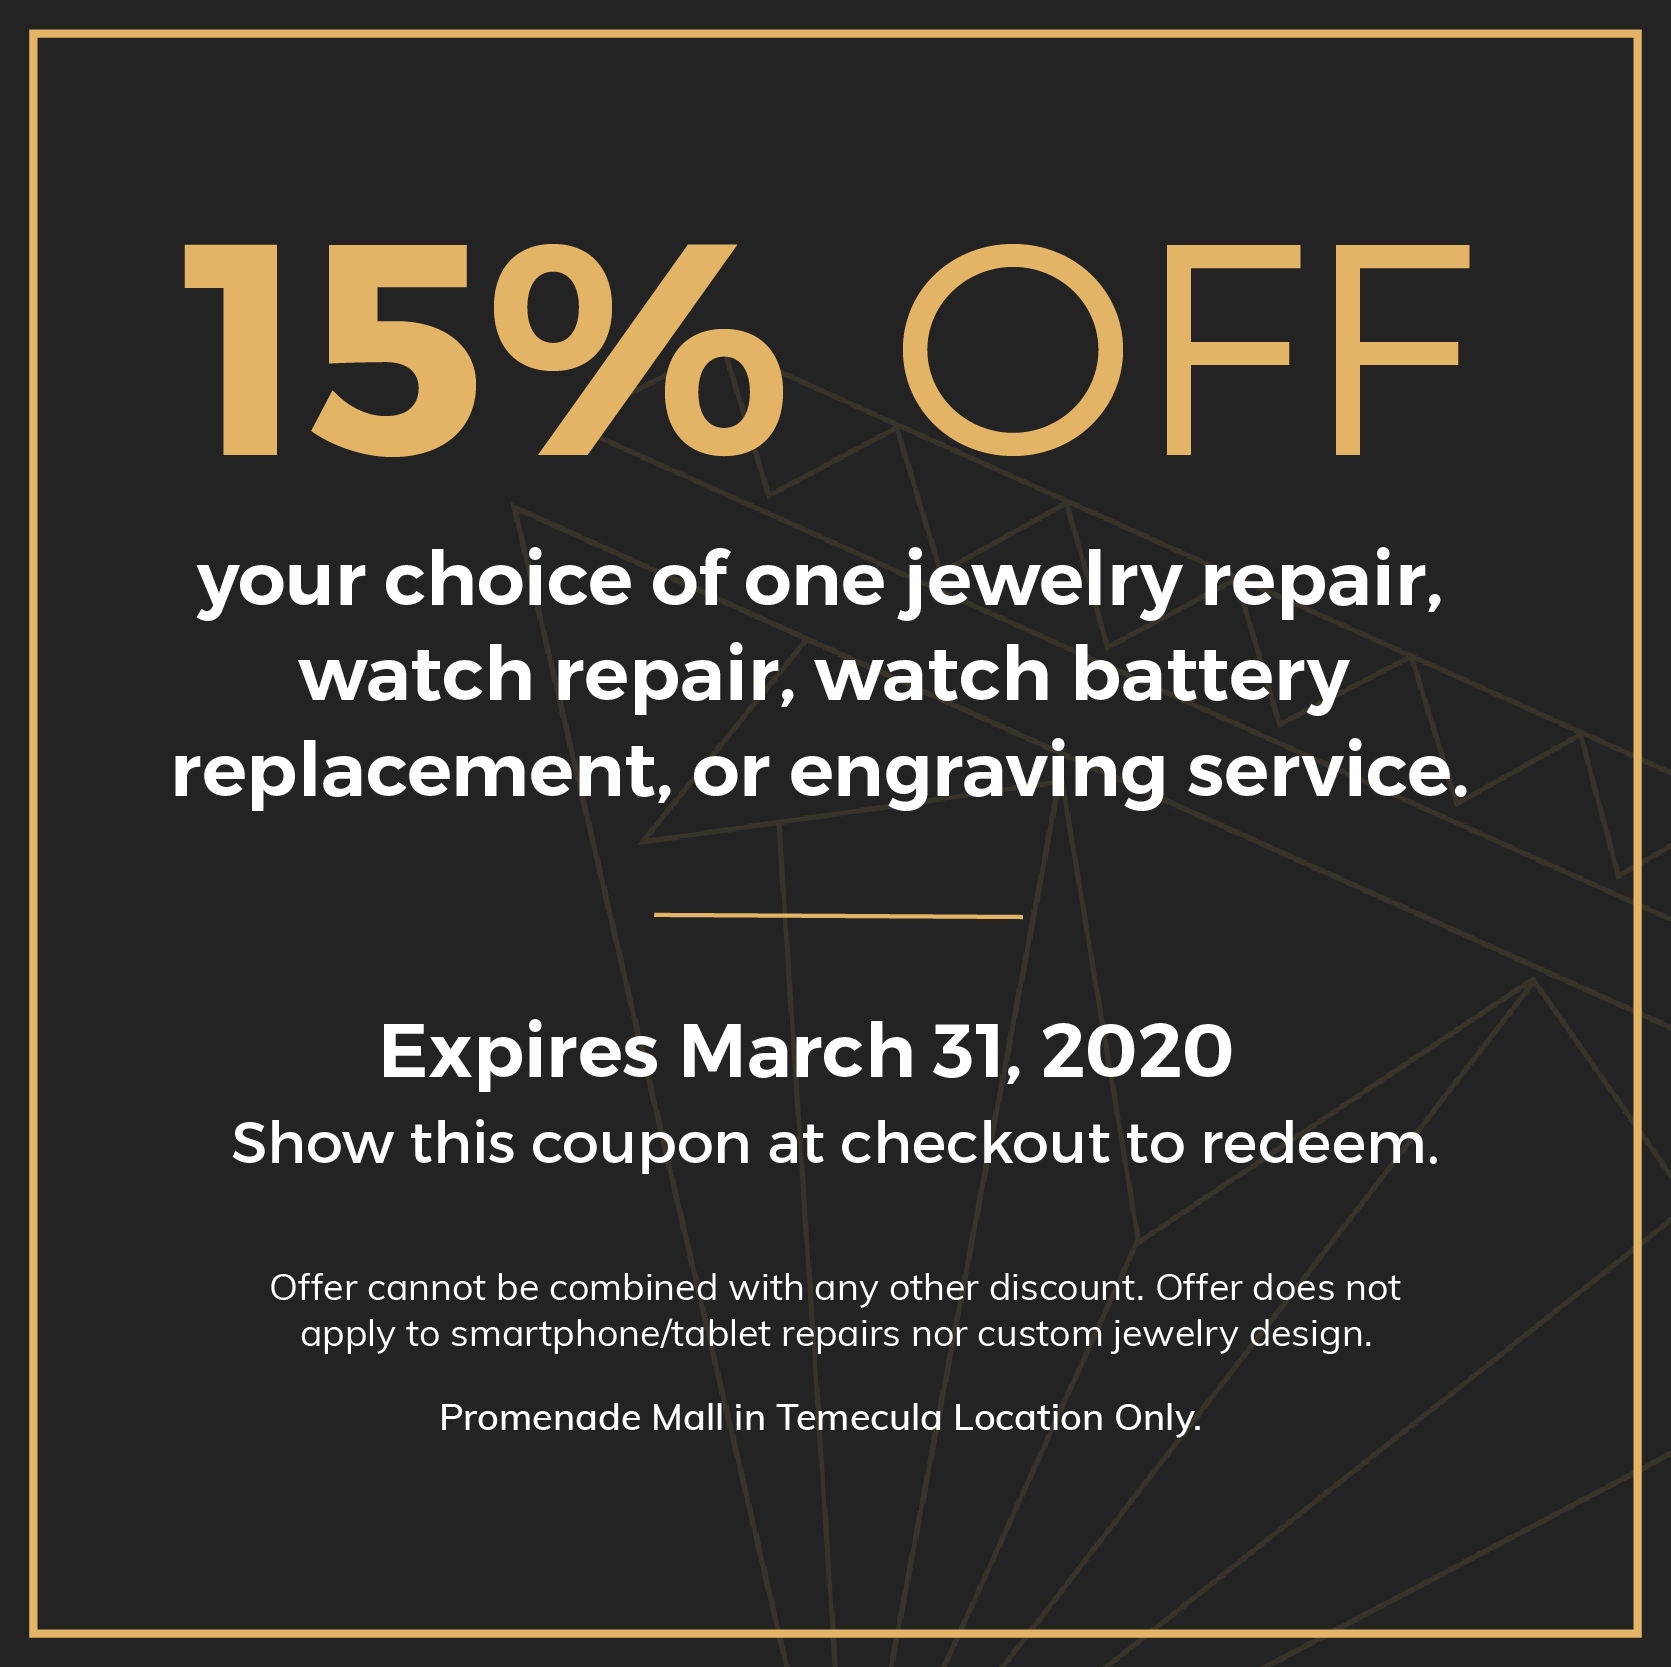 15% OFF. your choice of one jewelry repair, watch repair, watch battery replacement, or engraving service. Expires March 31, 2020. Show this coupon at checkout to redeem. Offer cannot be combined with any other discount. Offer does not apply to smartphone/tablet repairs nor custom jewelry design. The Promenade in Temecula Location Only.